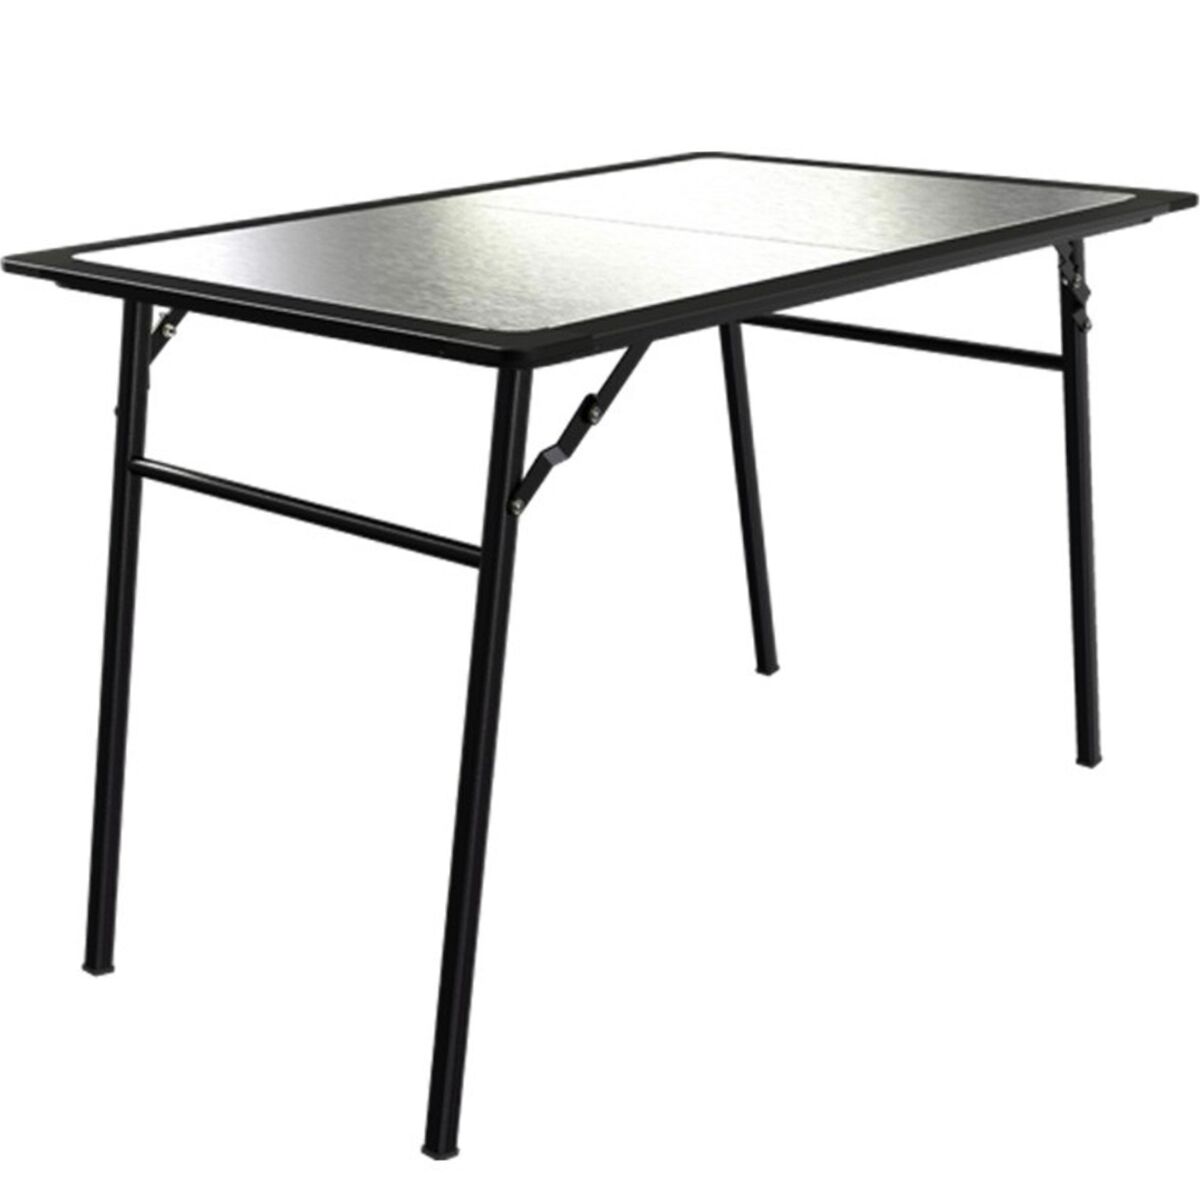 FrontRunner Pro Stainless Steel Camp Table